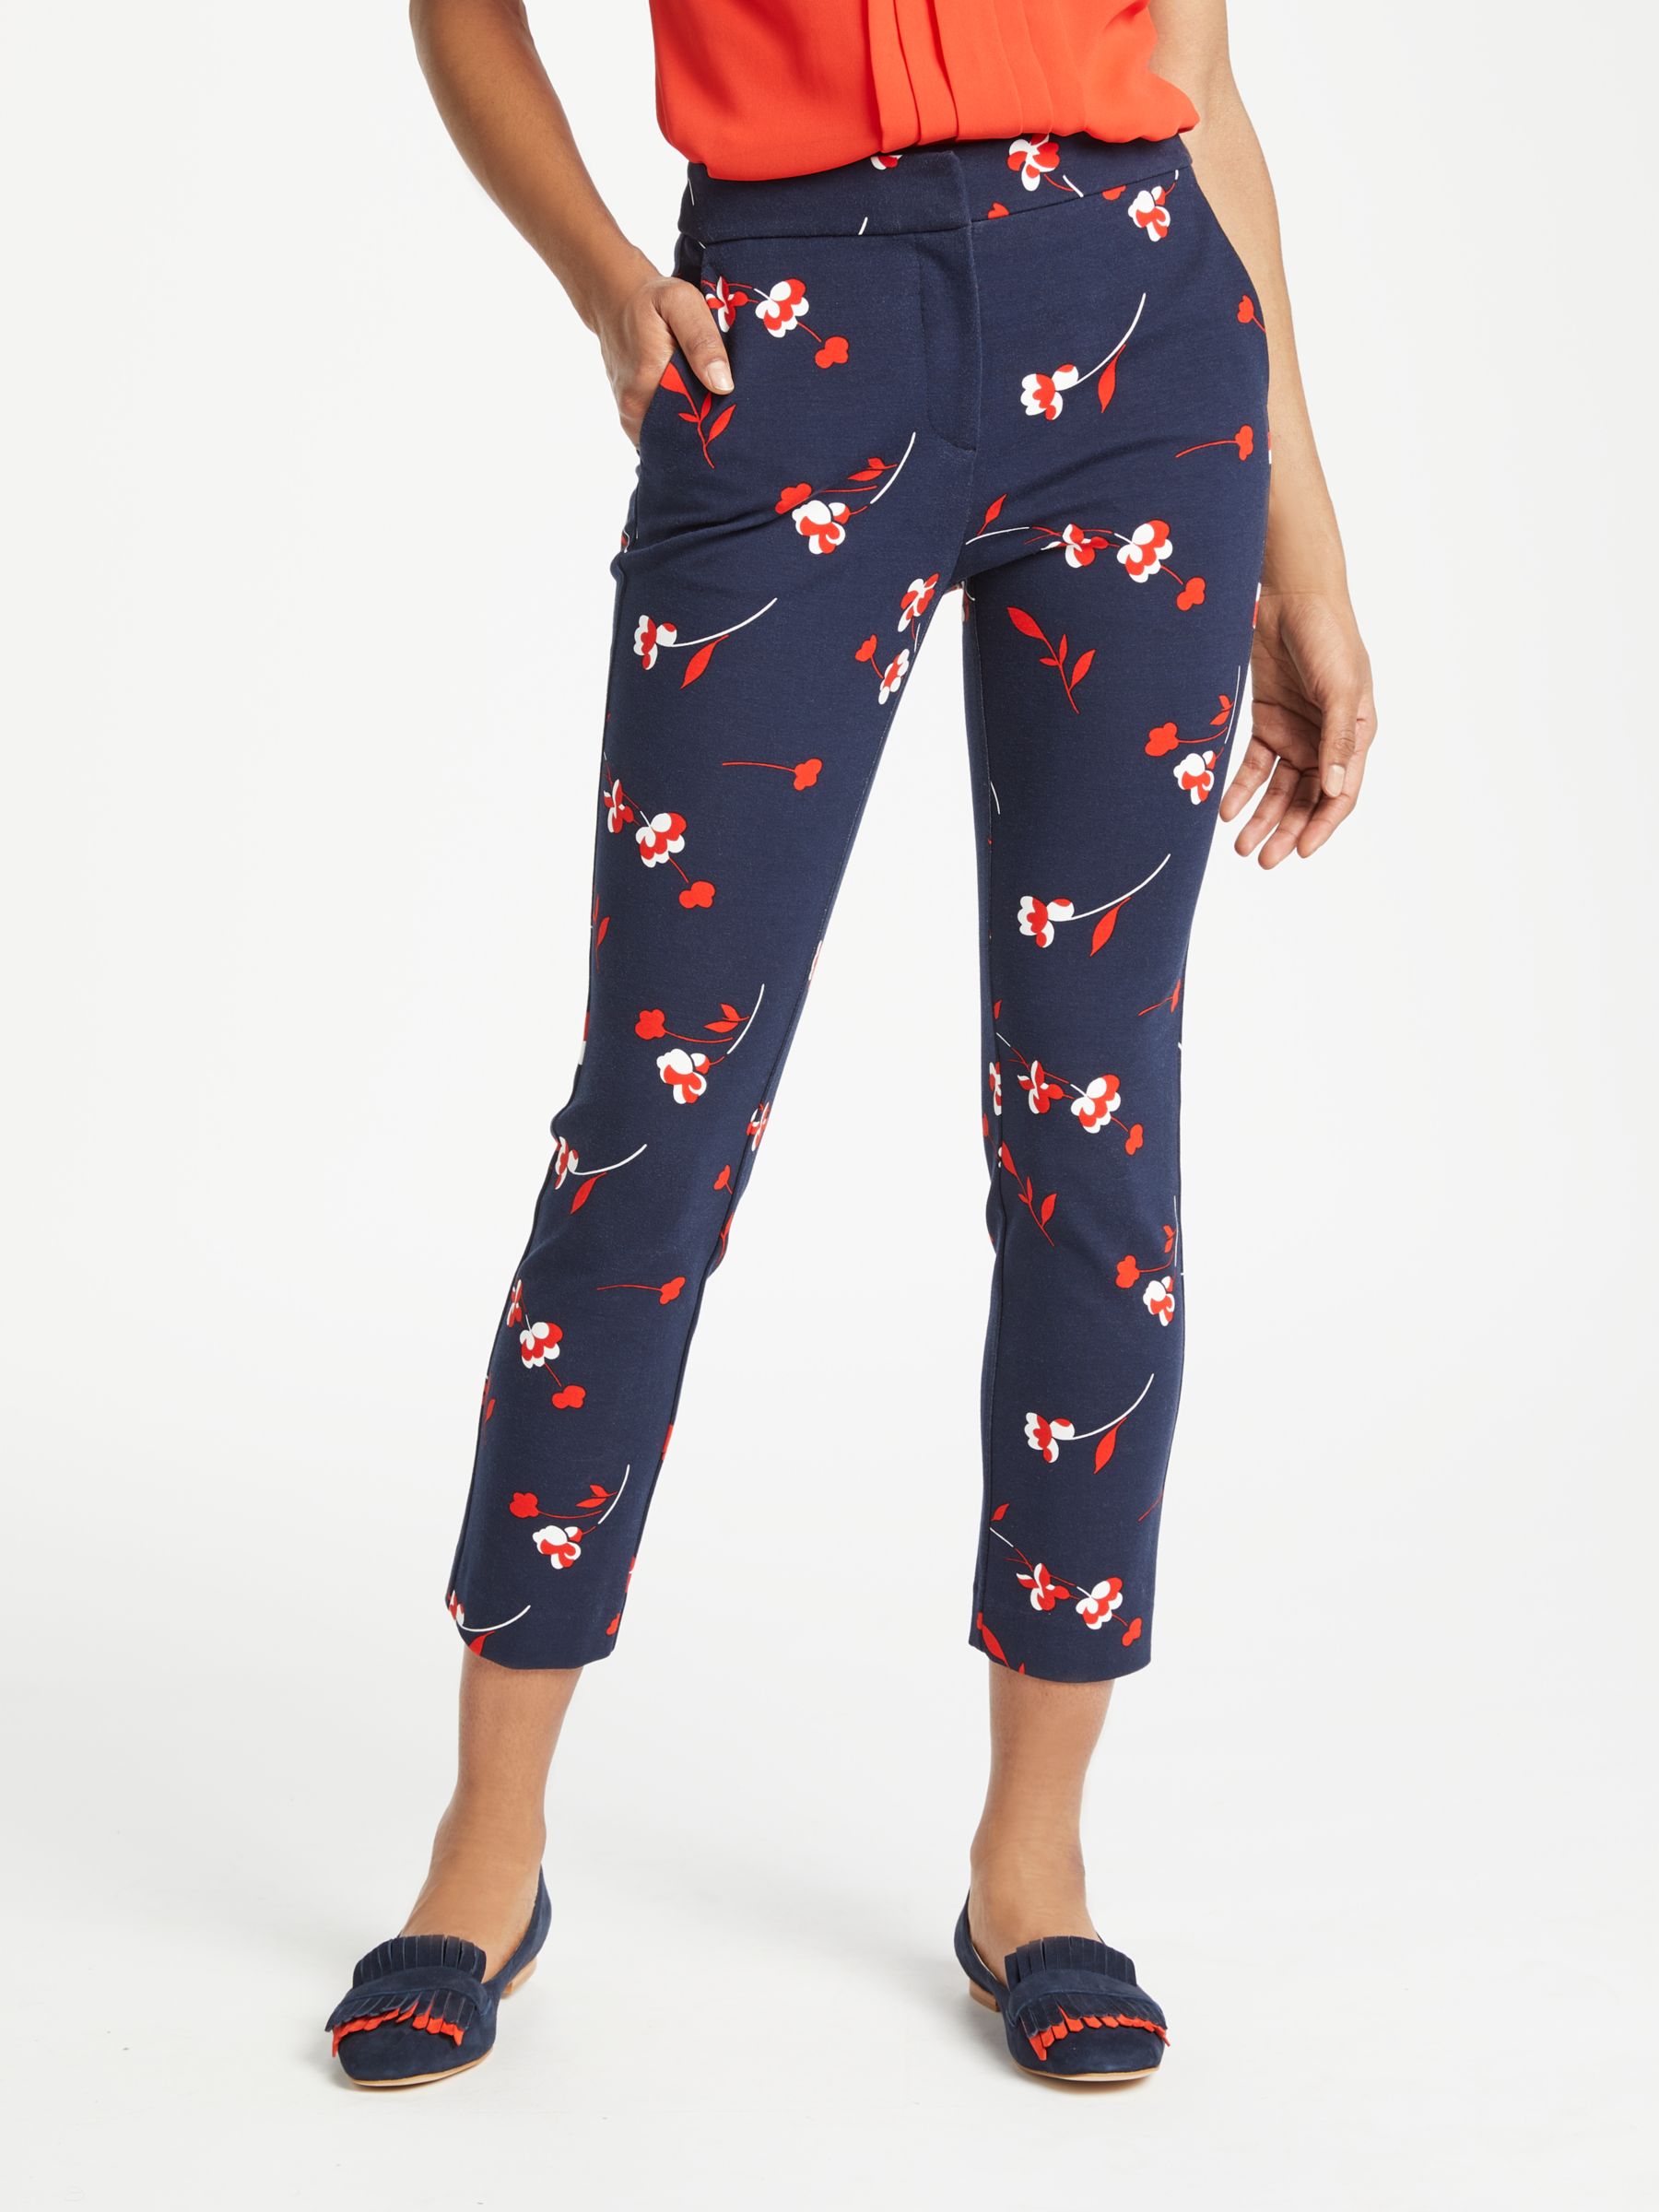 Boden Hampshire 7/8 Floral Trousers, Navy at John Lewis & Partners